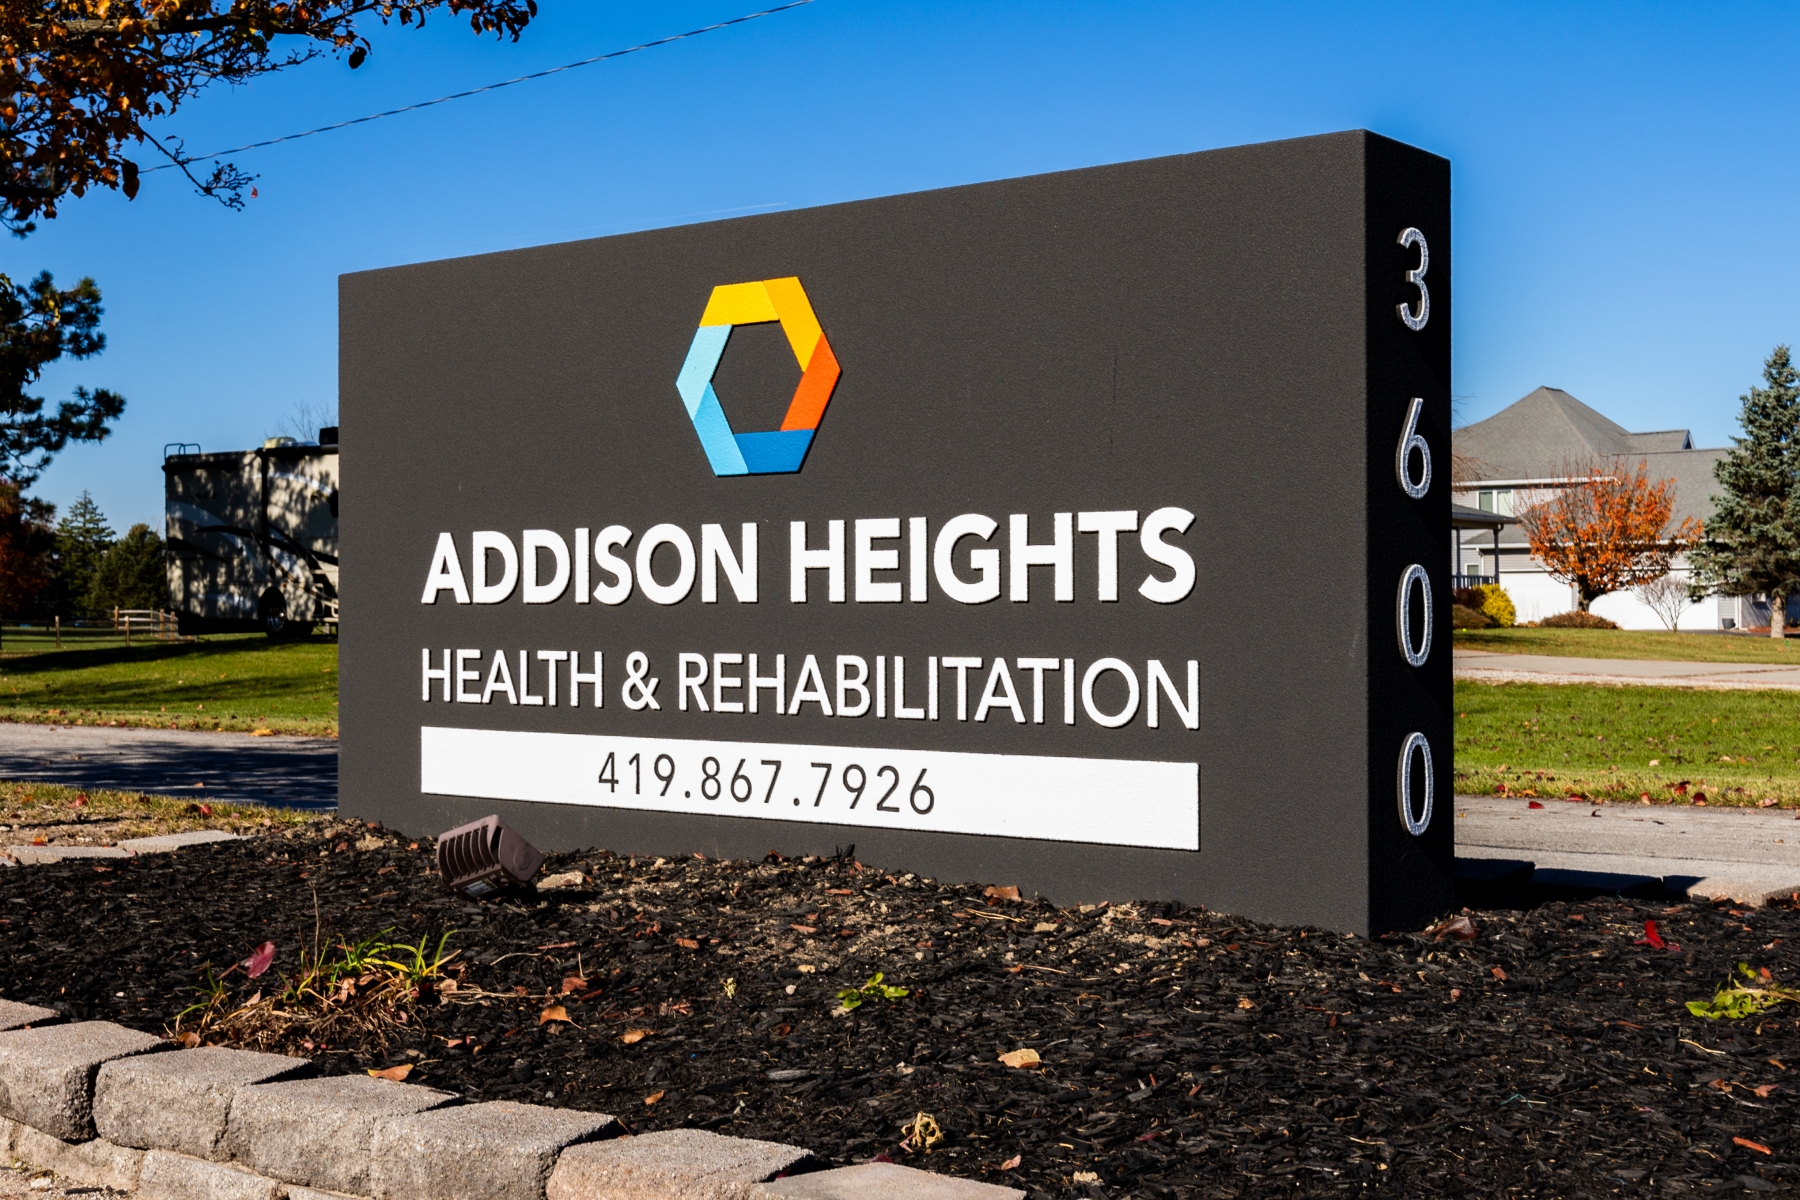 Addison Heights welcome sign